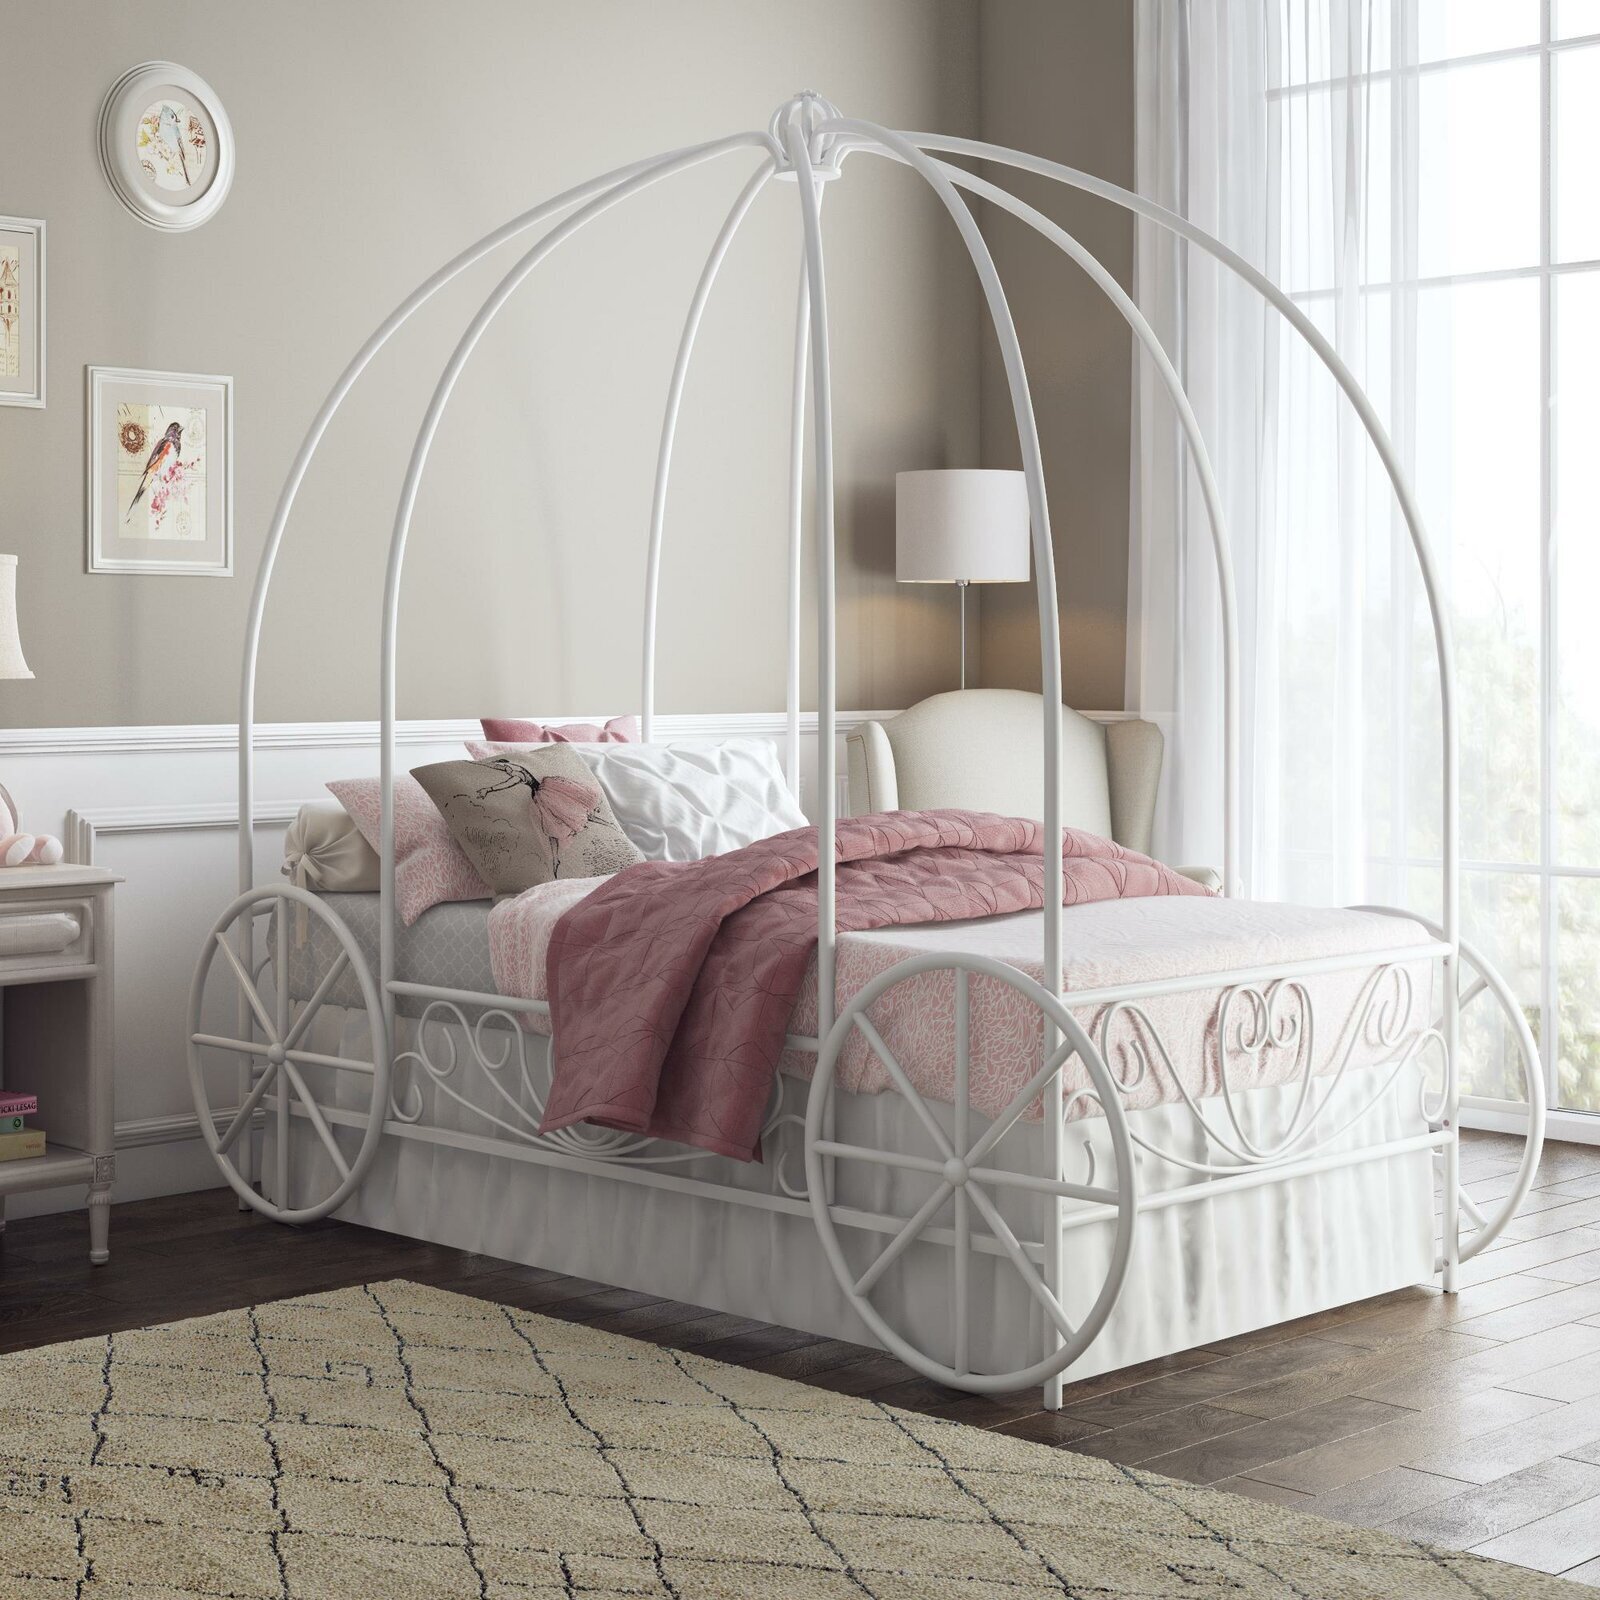 Fairytale Carriage Style Canopy Bed